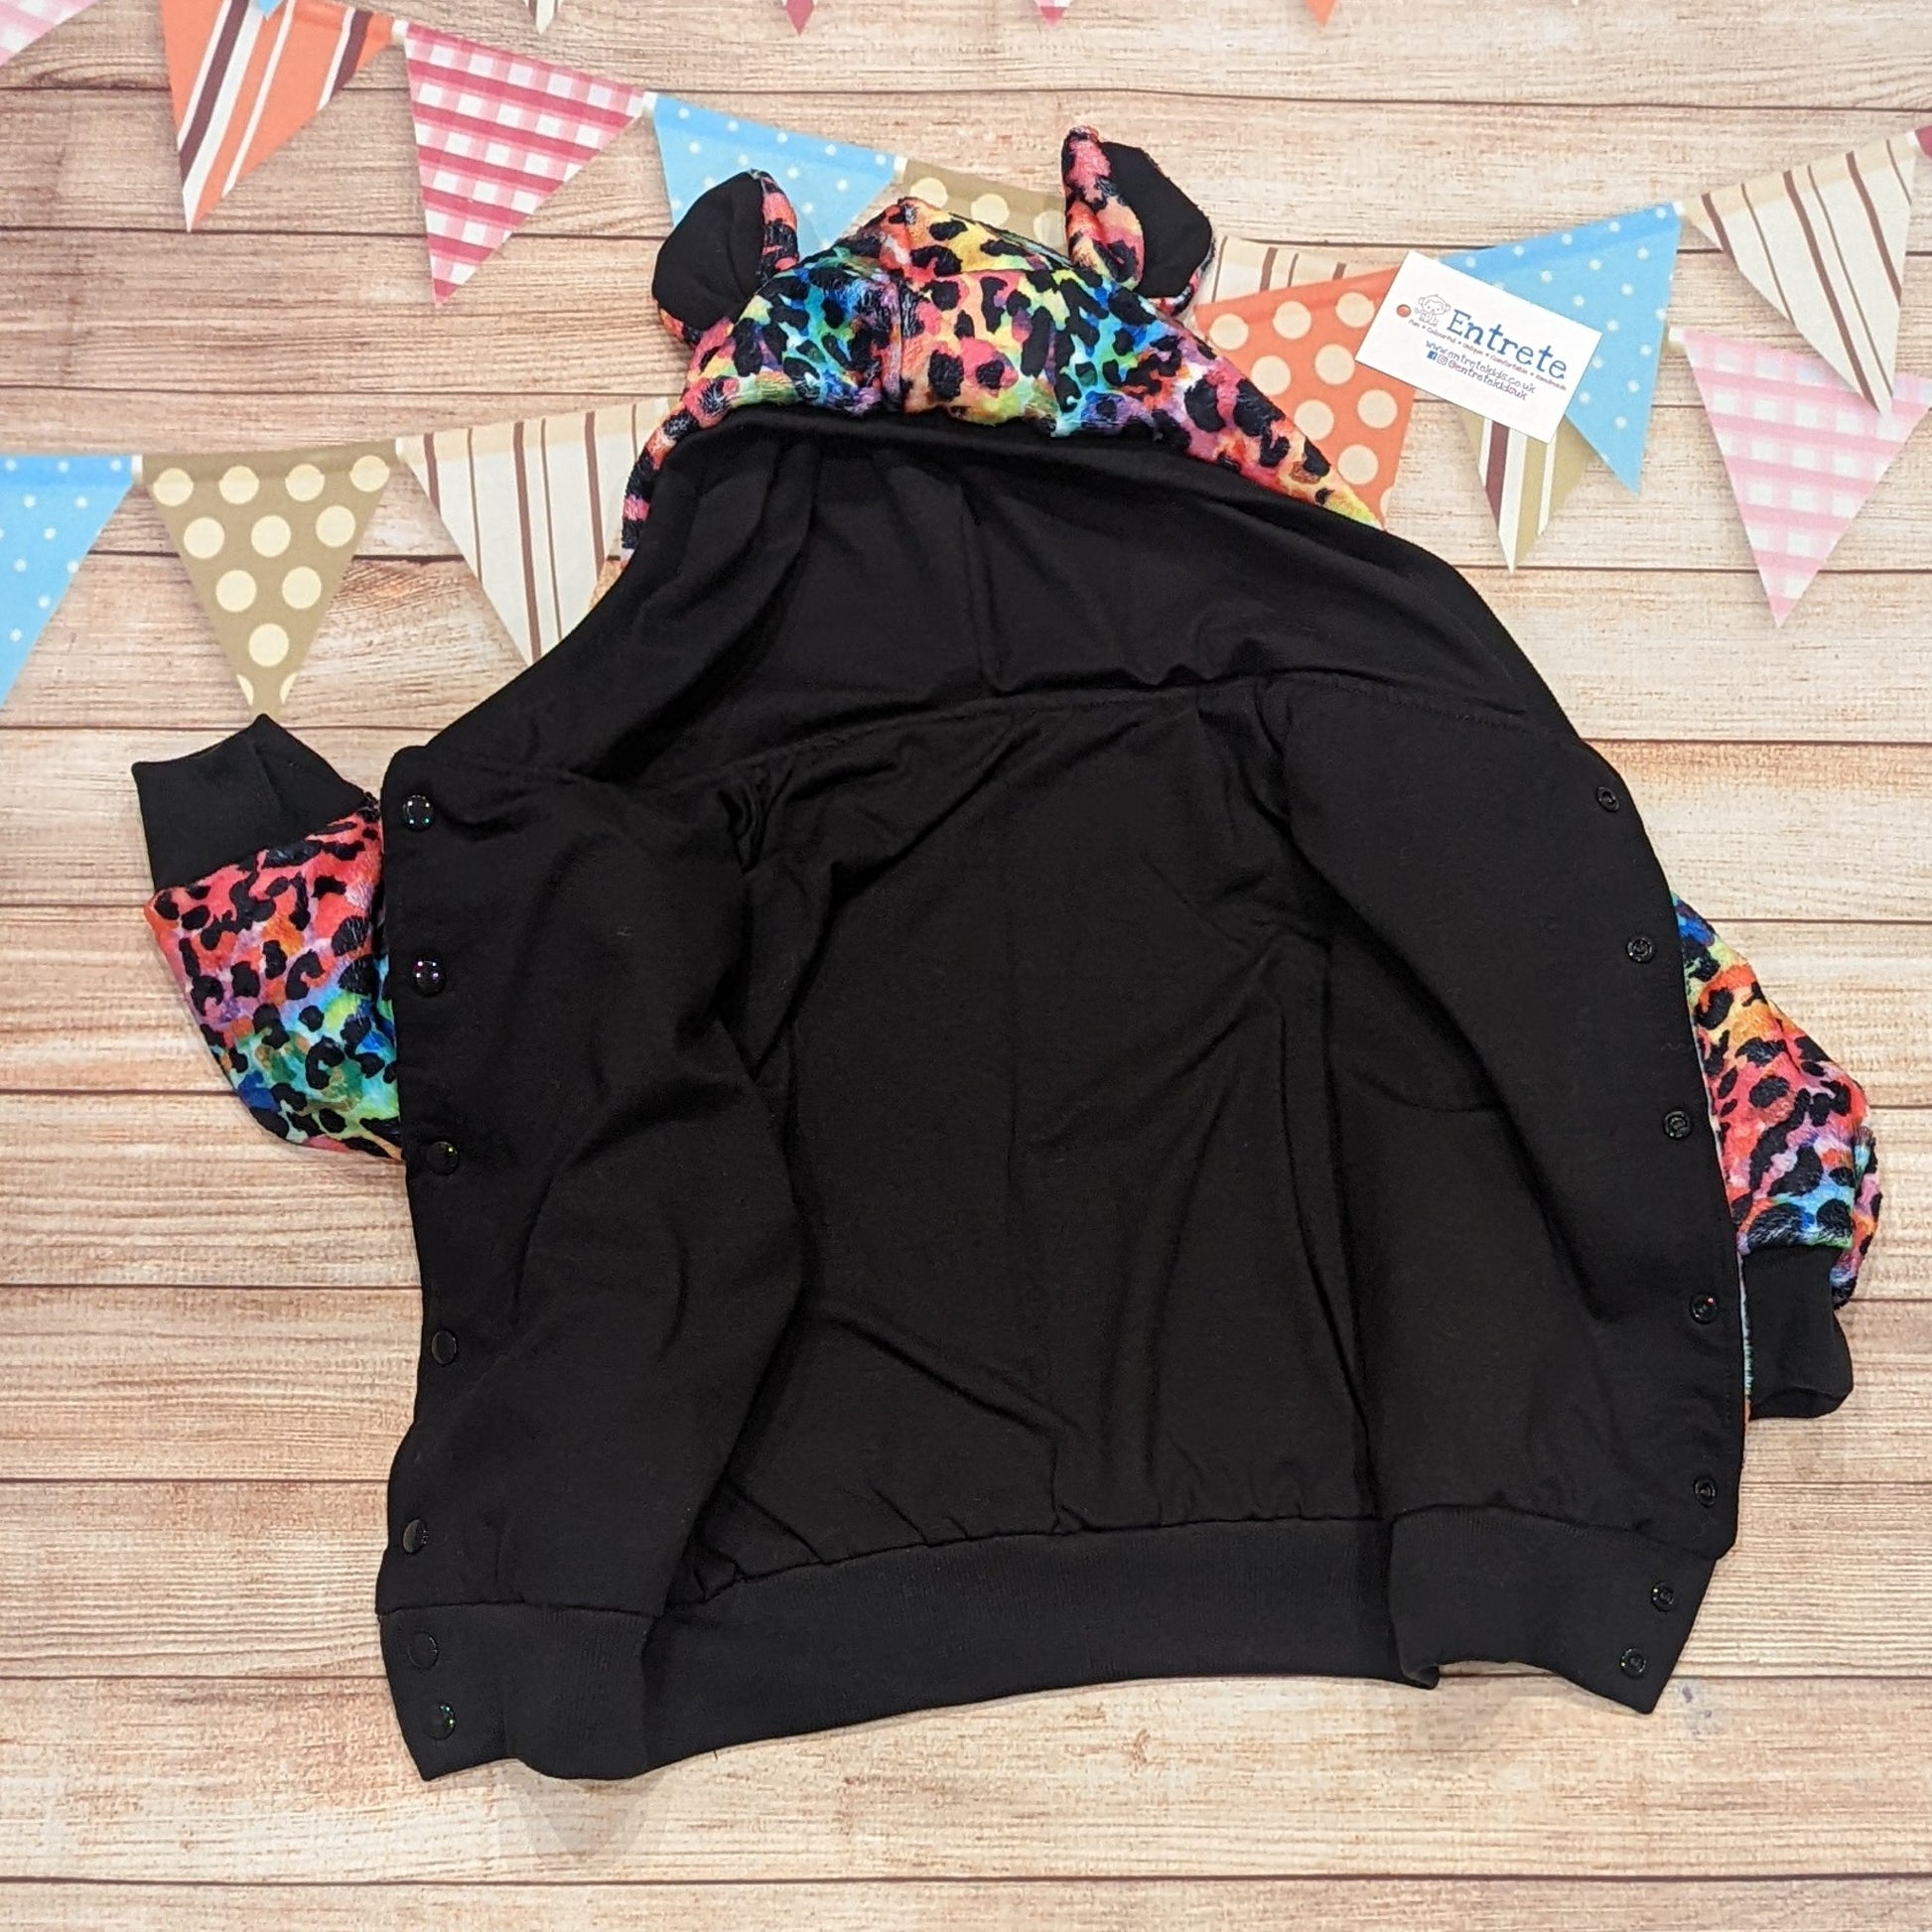 The colourful and warm rainbow leopard hoodie. Handmade using rainbow leopard print bubs fleece, black cotton ribbing, with a black cotton jersey reverse. Showing the black cotton jersey reverse.